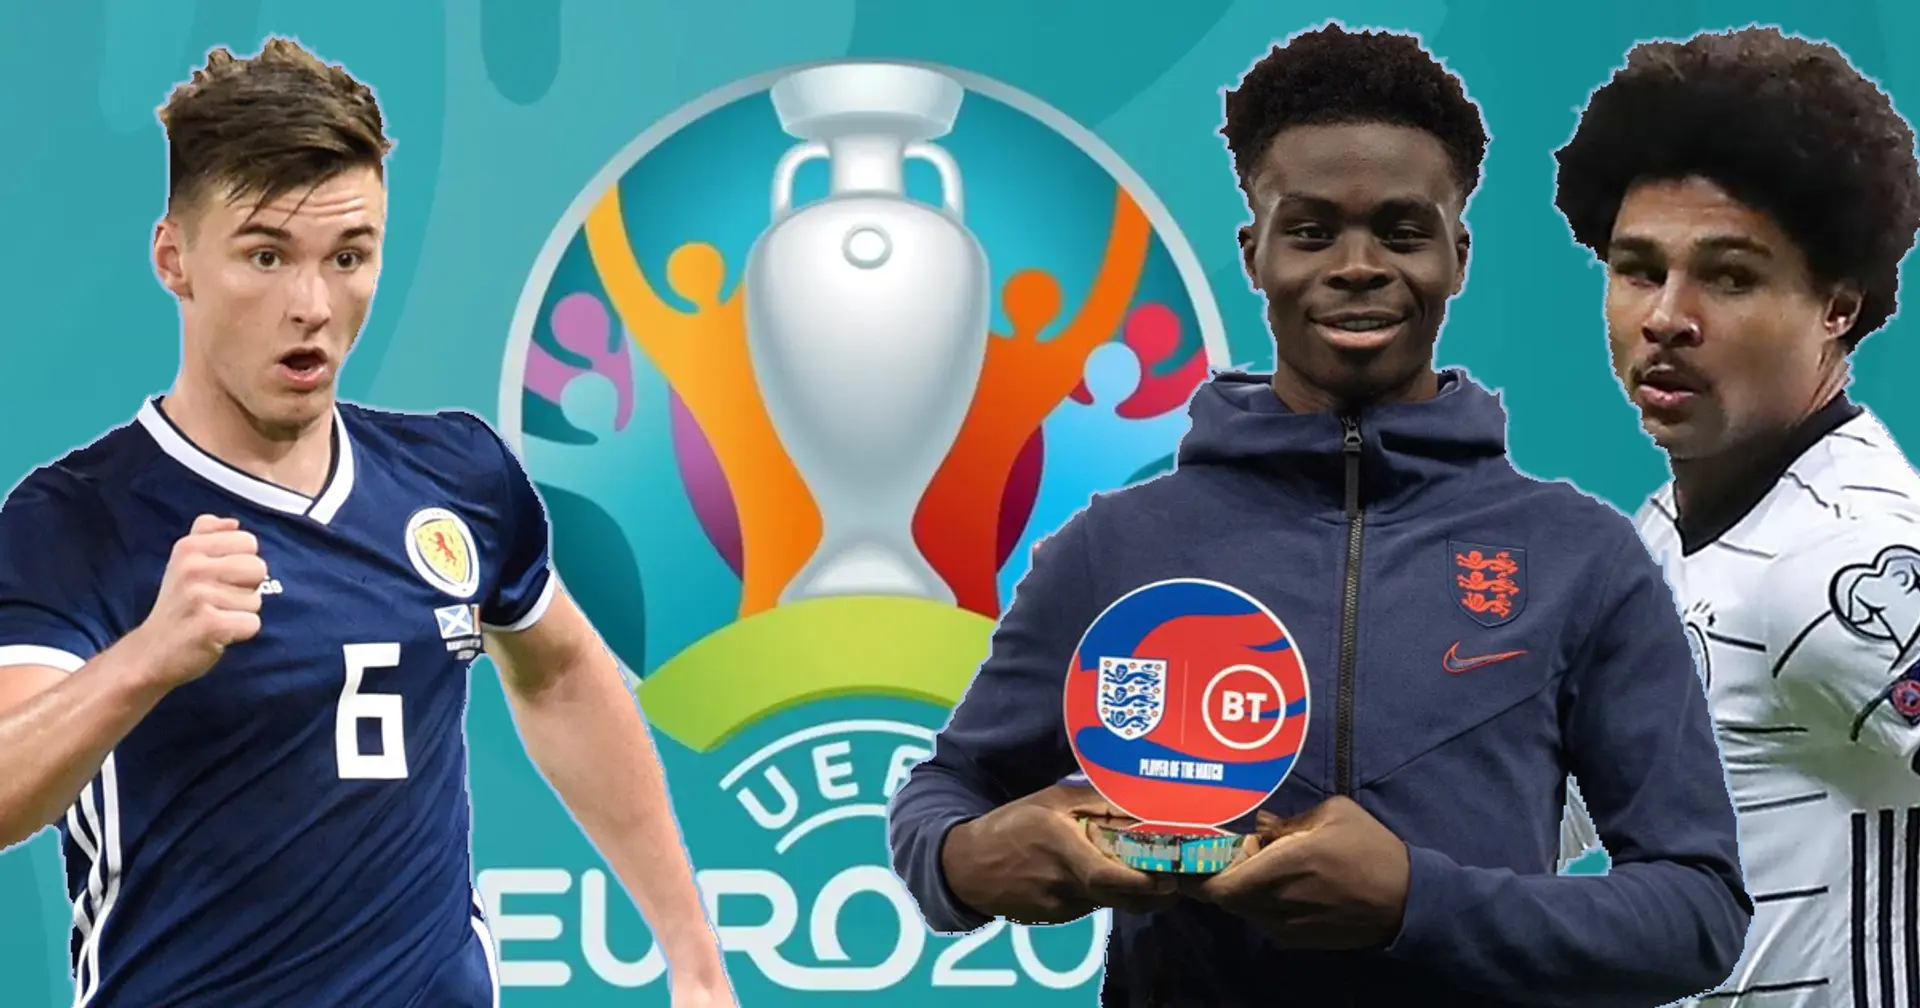 Euro 2020 group stage: Ultimate guide for Arsenal fans